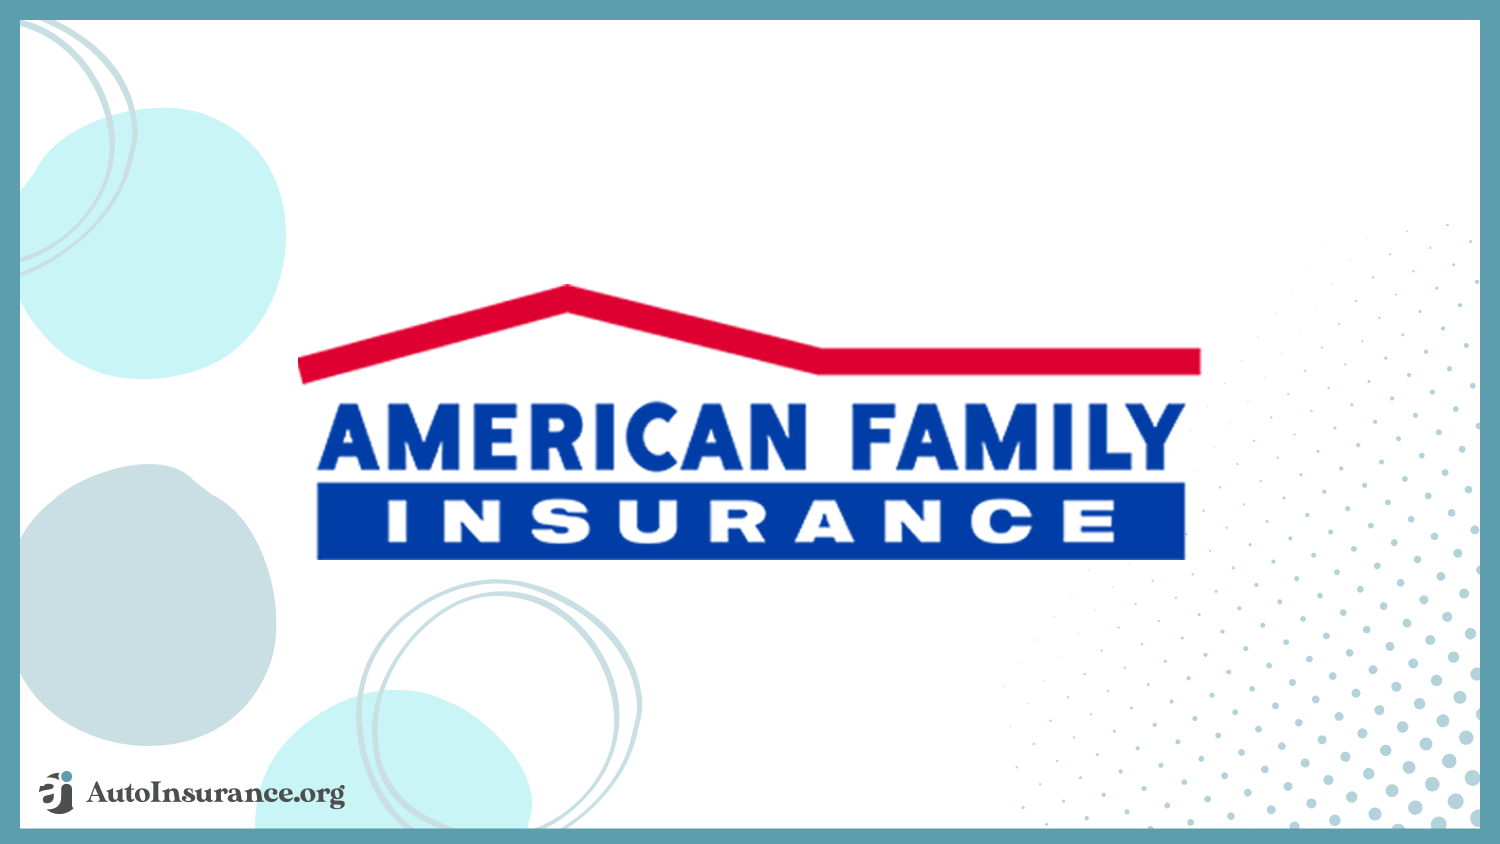 American Family: Best Auto Insurance for Low-Income Drivers